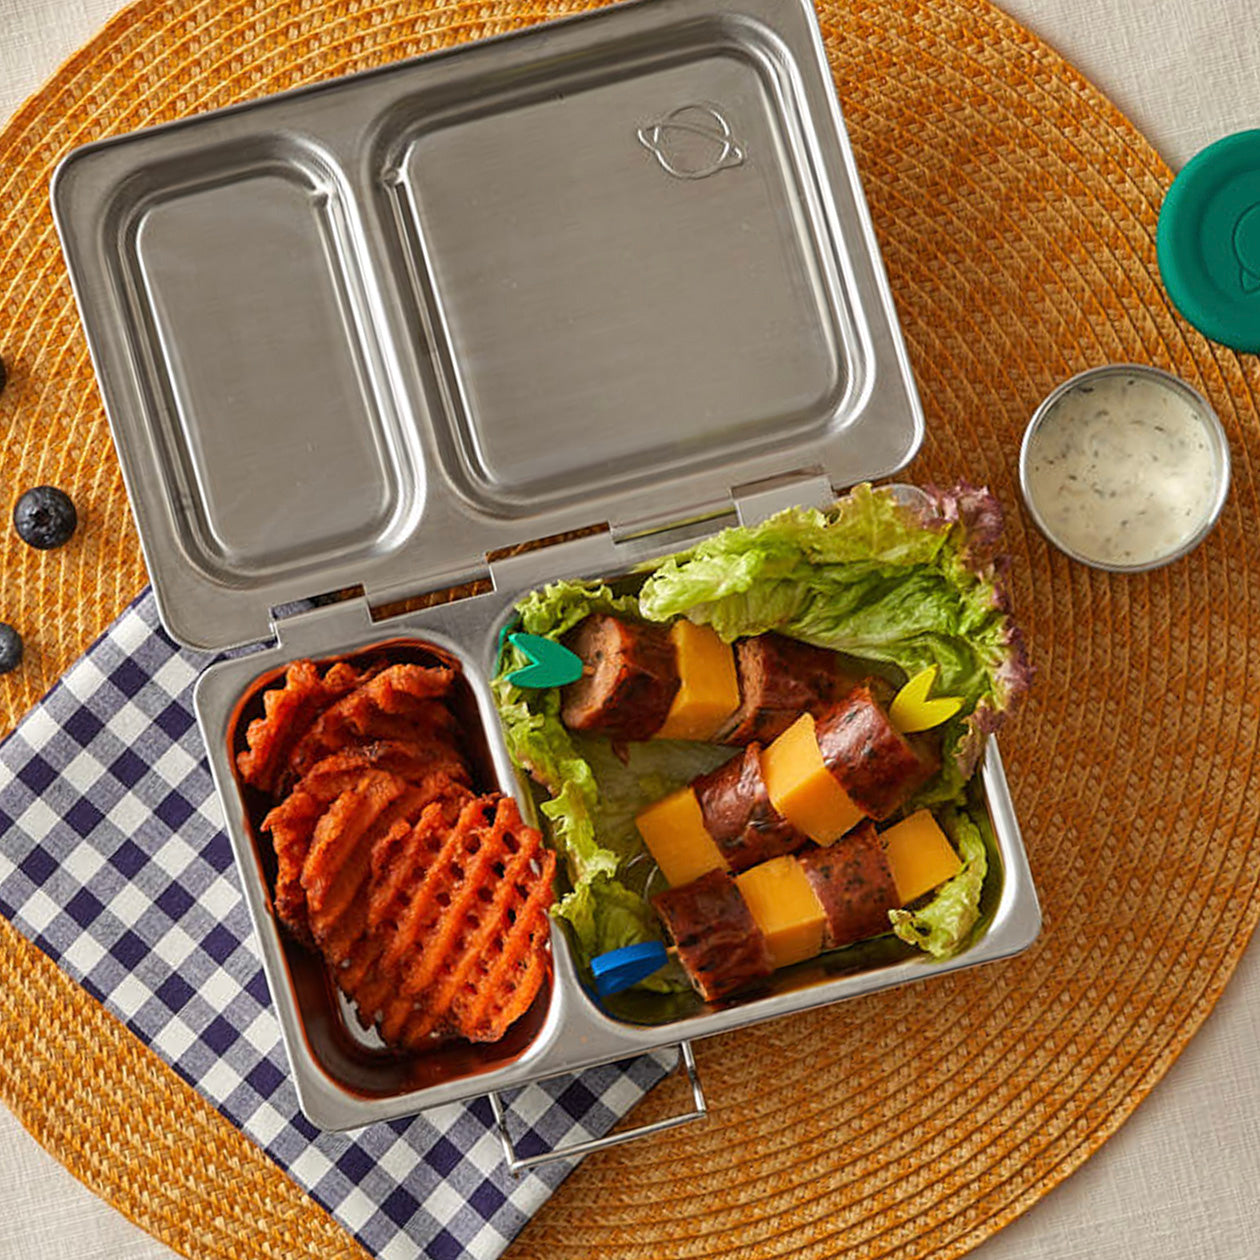 Shuttle Stainless Steel Lunchbox - Little Reef and Friends